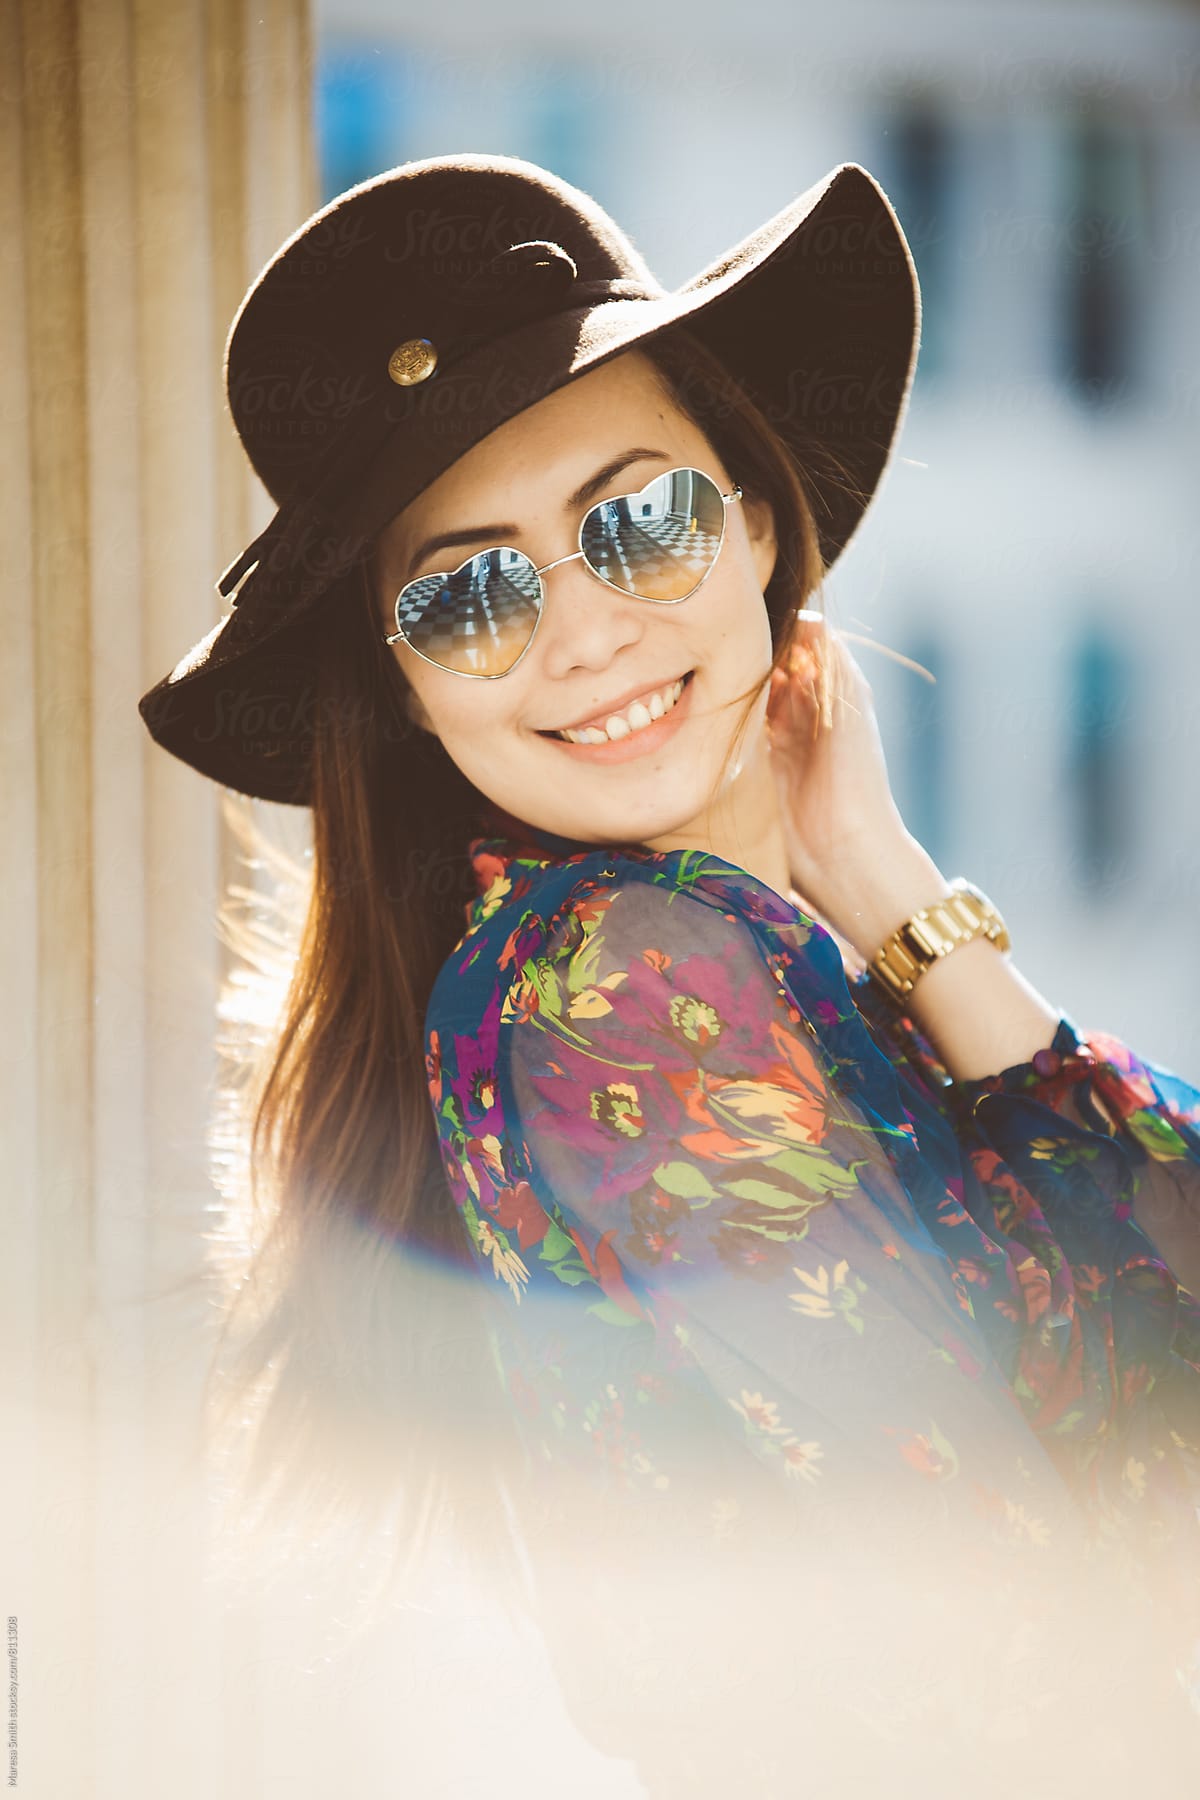 Smiling happy young lady in a floppy hat in the afternoon light